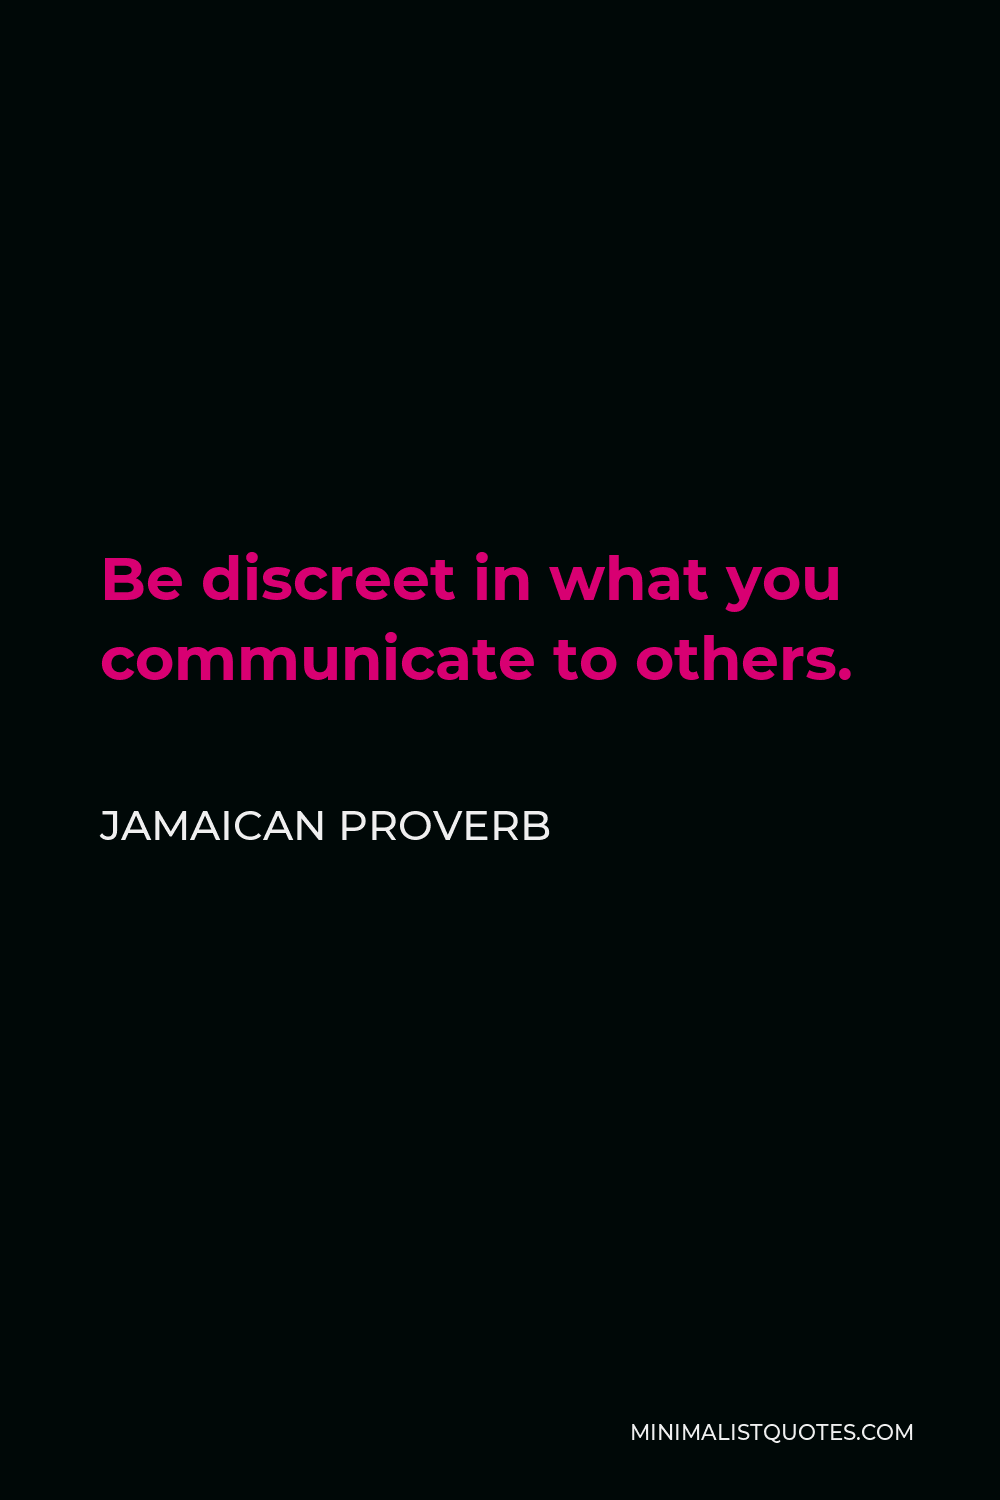 Jamaican Proverb Quote - Be discreet in what you communicate to others.